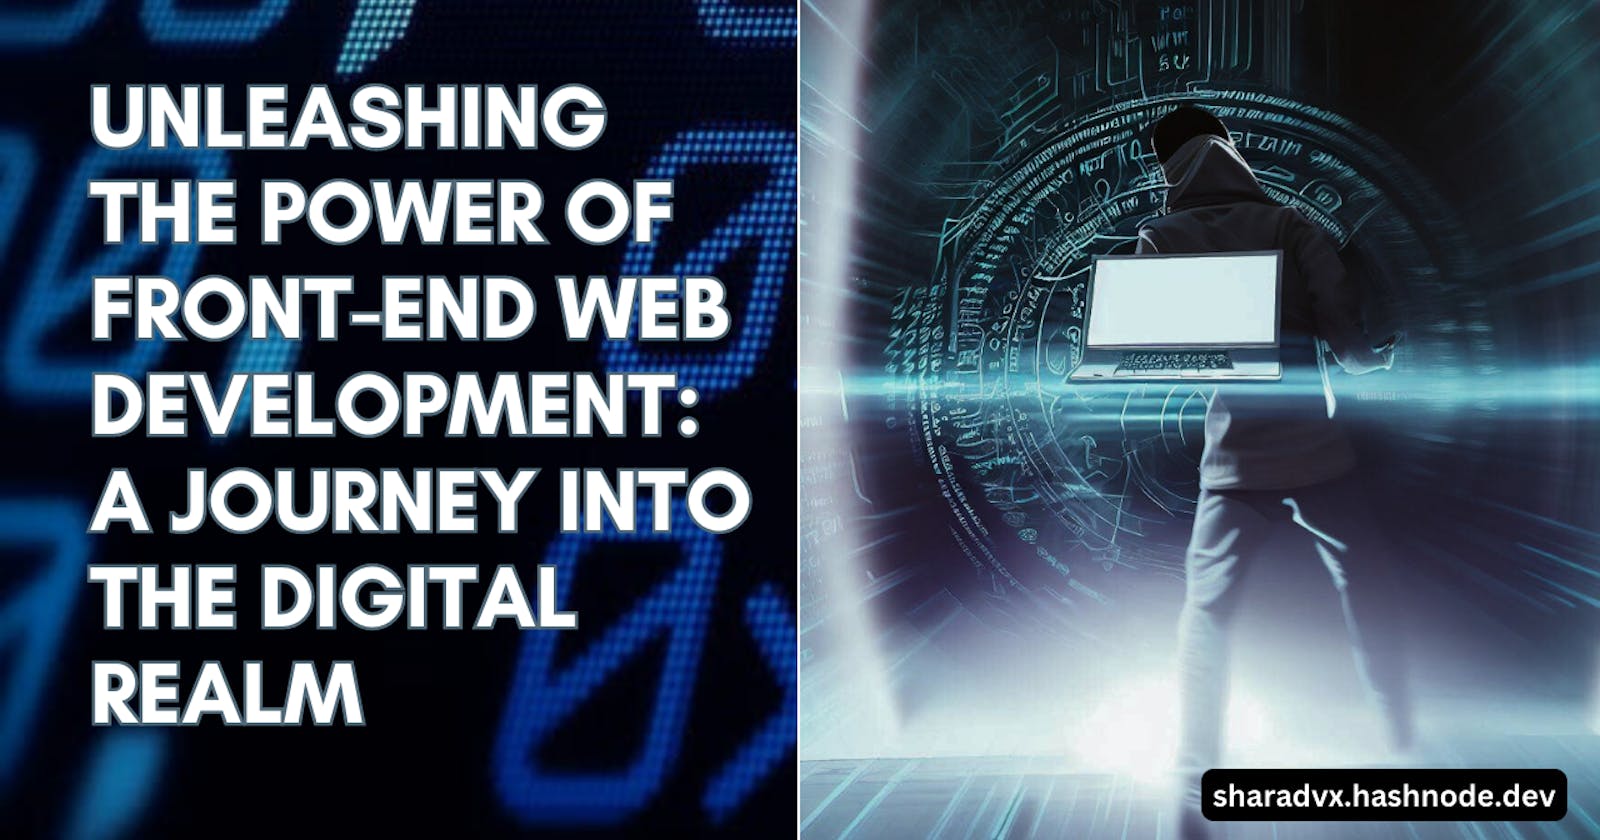 Unleashing the Power of Front-End Web Development: A Journey into the Digital Realm